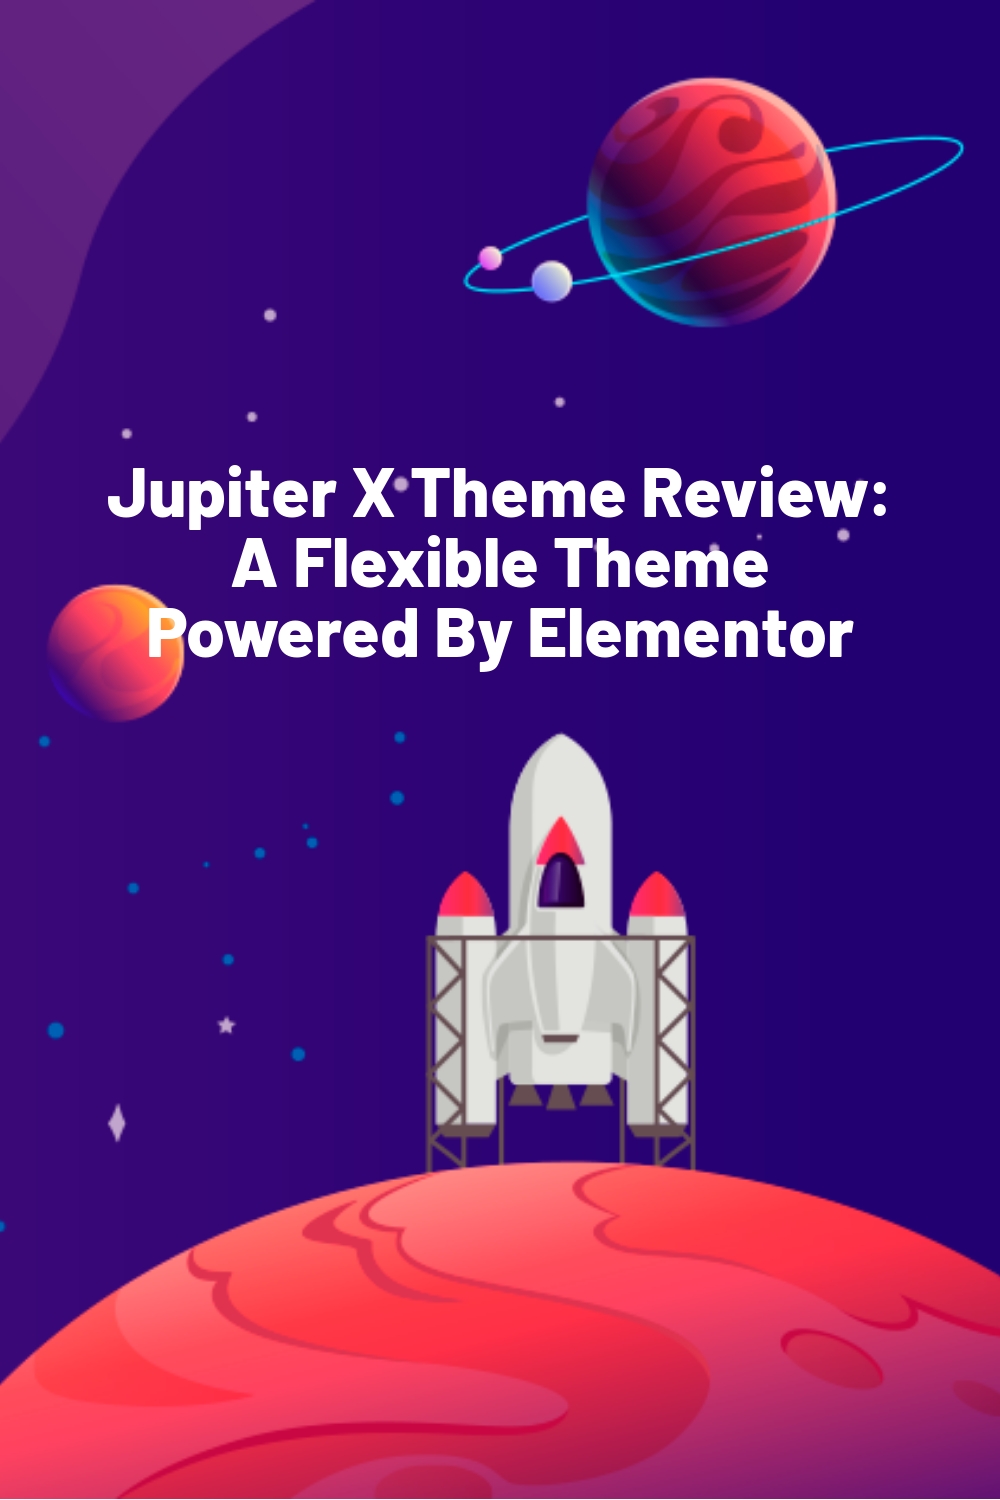 Jupiter X Theme Review: A Flexible Theme Powered By Elementor